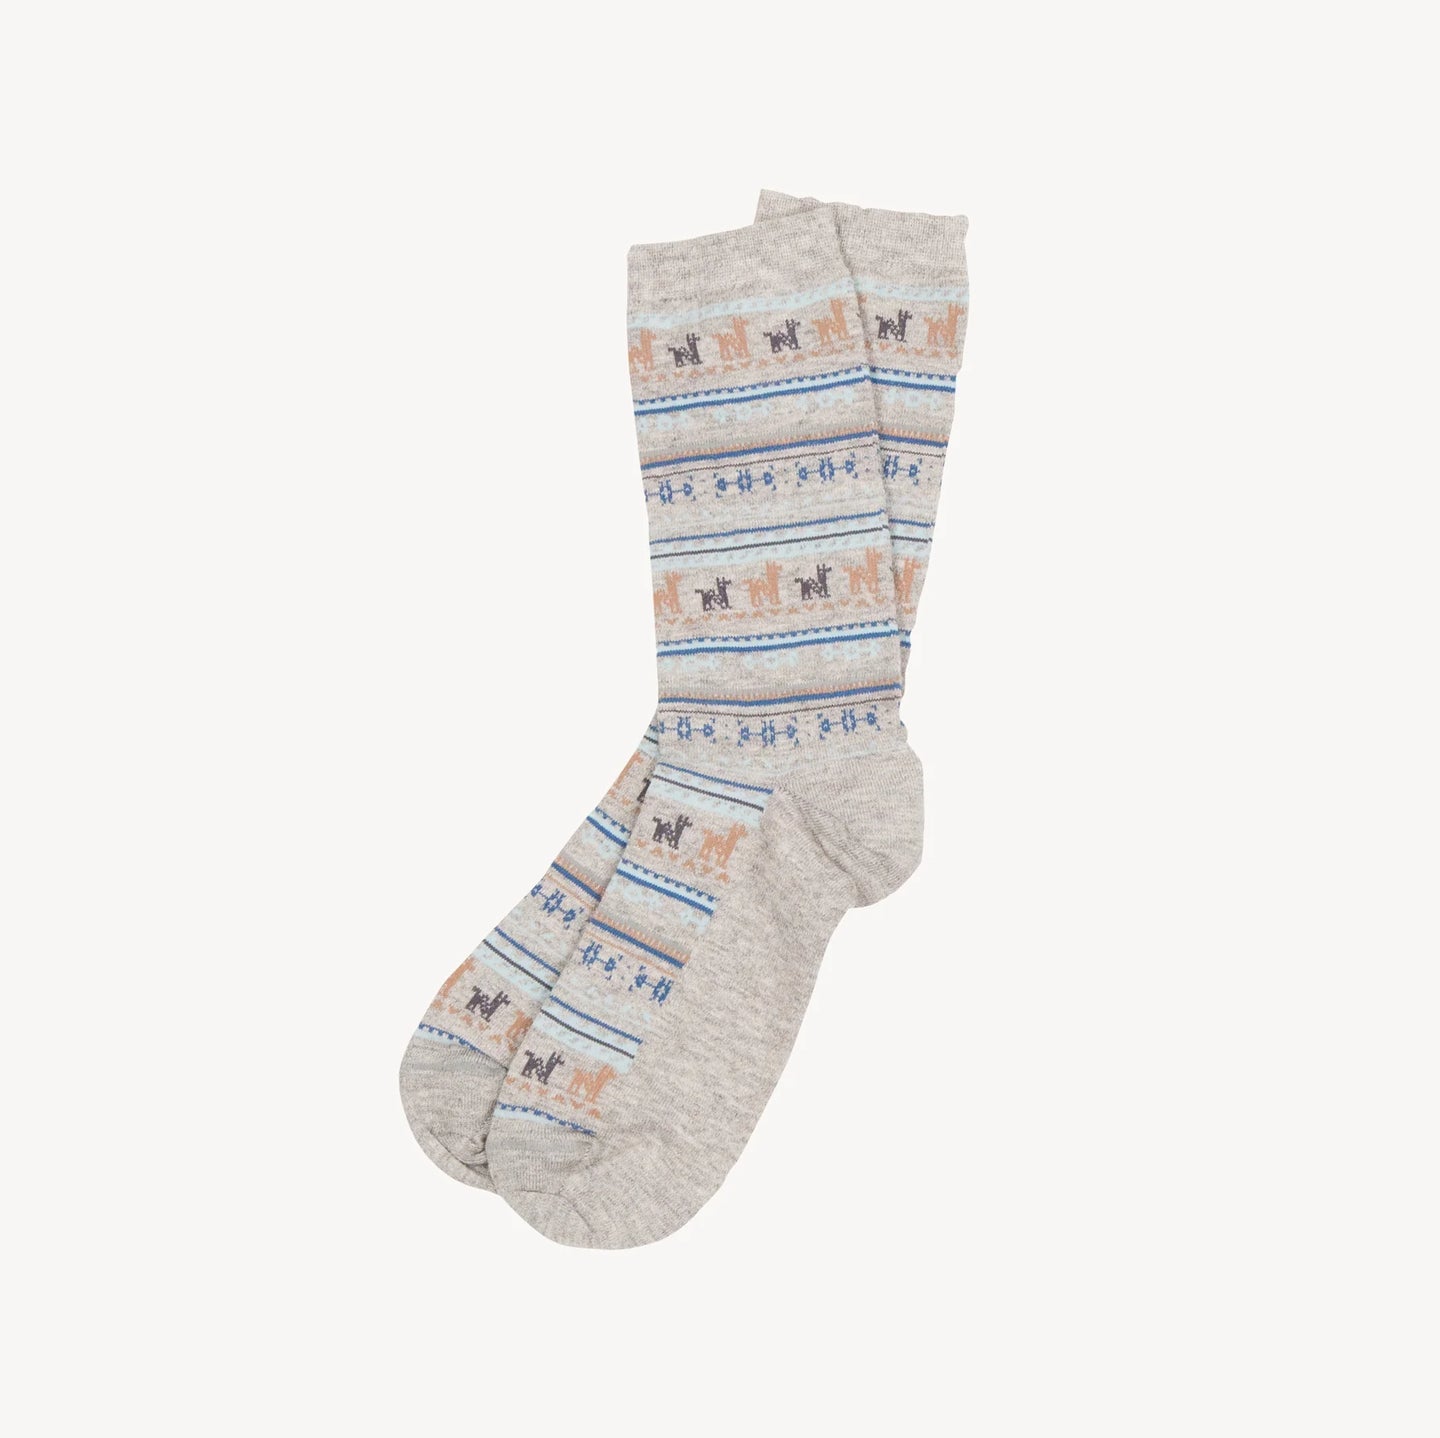 Light gray socks shown for sale on a white backround. The socks have a patten that includes alpacas, lines, dots and shapes in the colours of blues and browns.